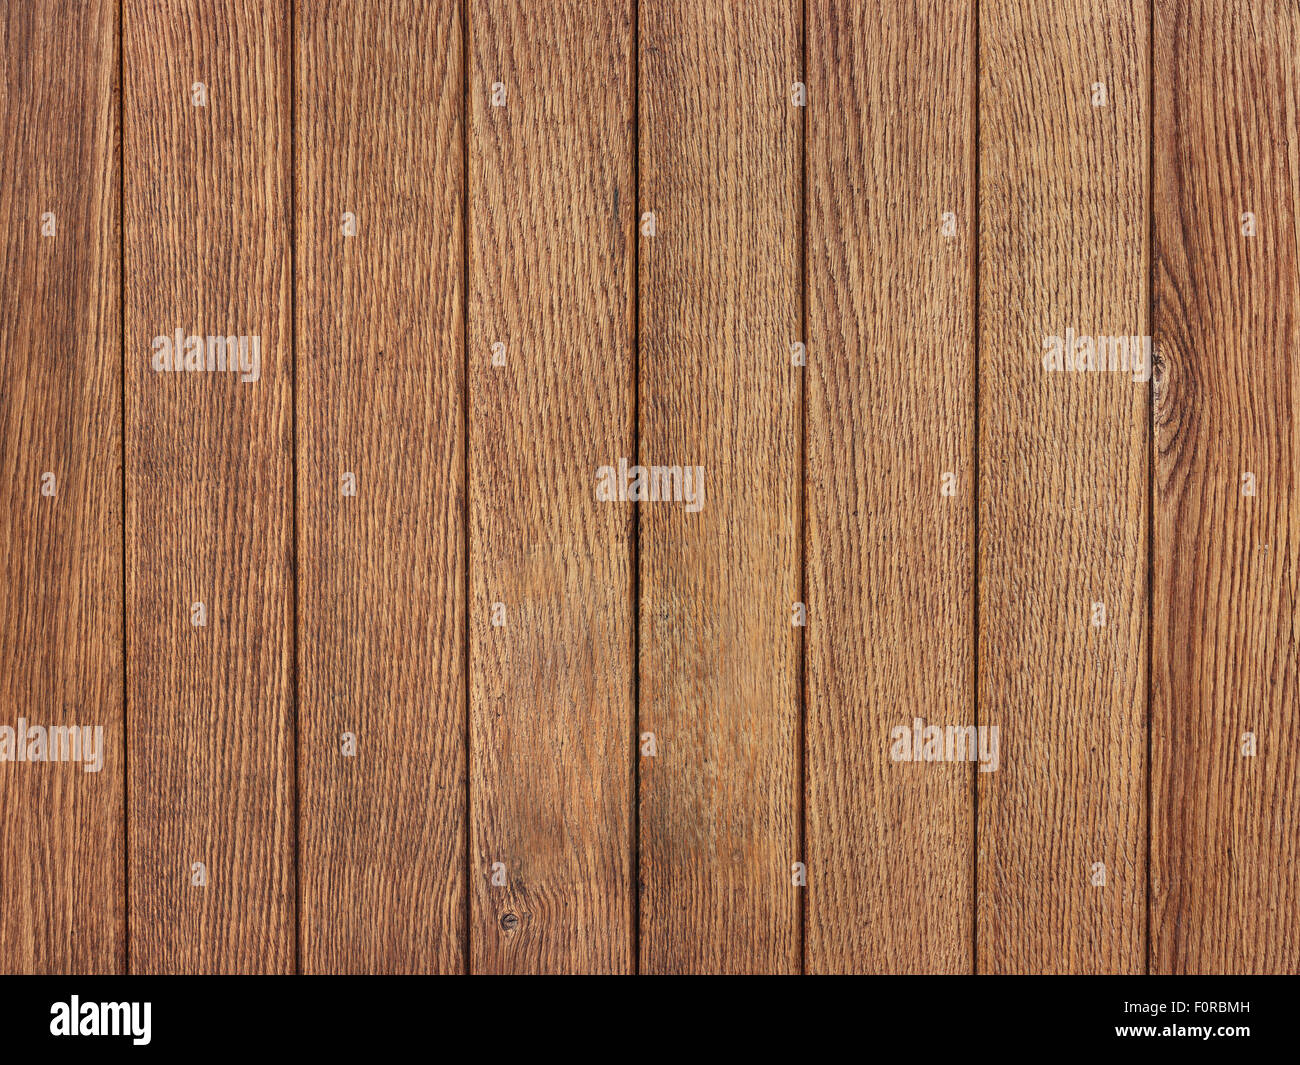 Close up shot of a wooden door providing interesting and authentic wooden texture for the designer to use as a background image. Stock Photo